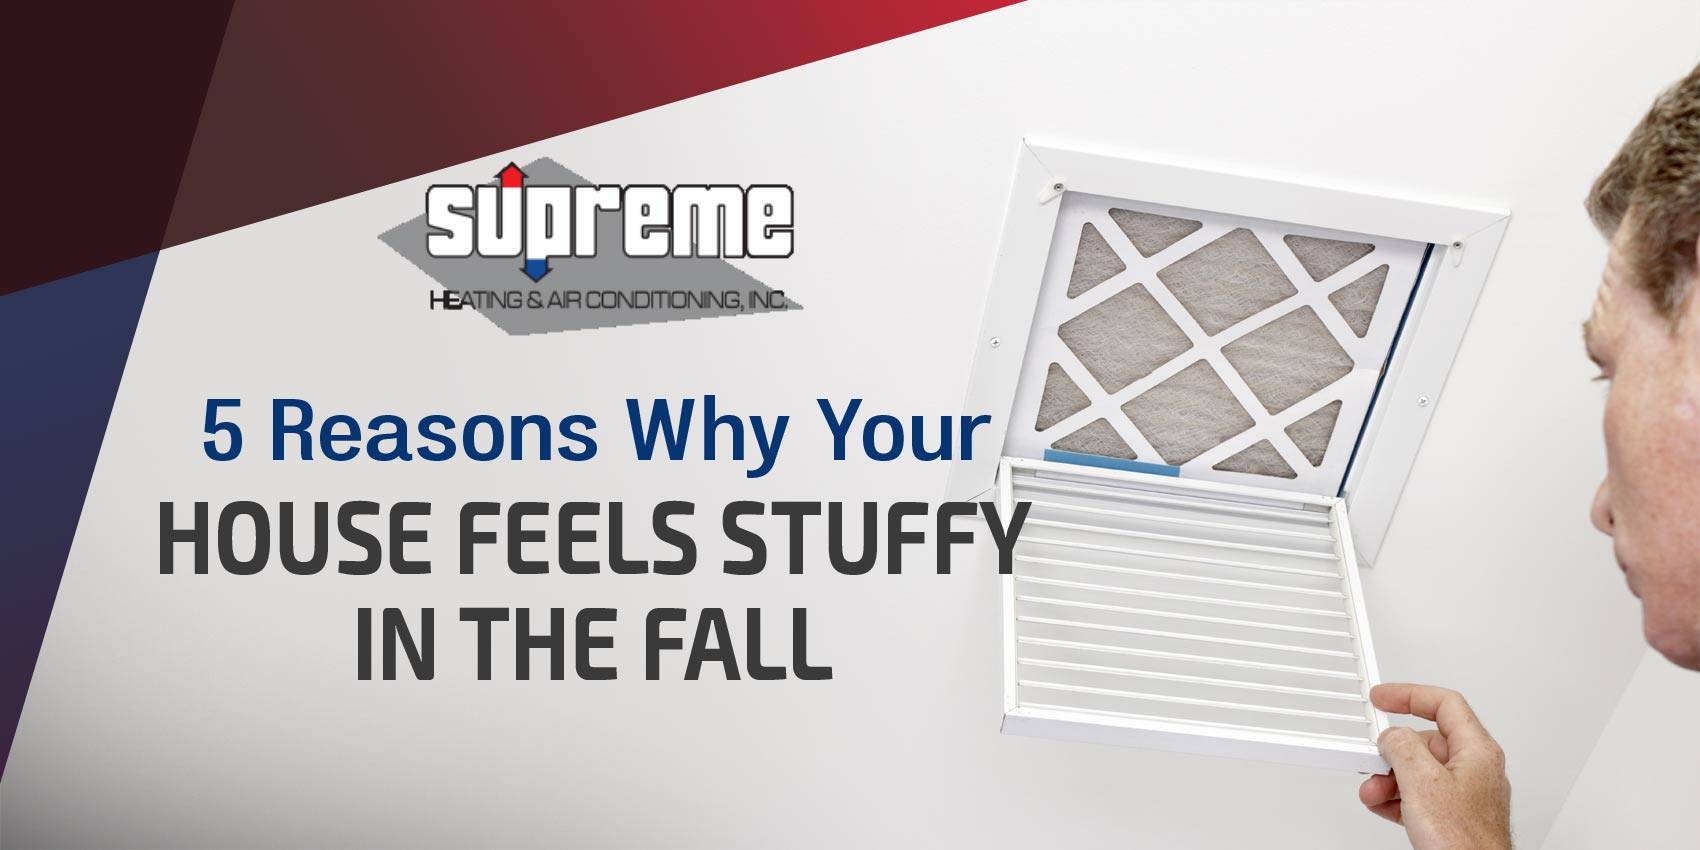 5 Reasons Why Your House Feels Stuffy in the Fall